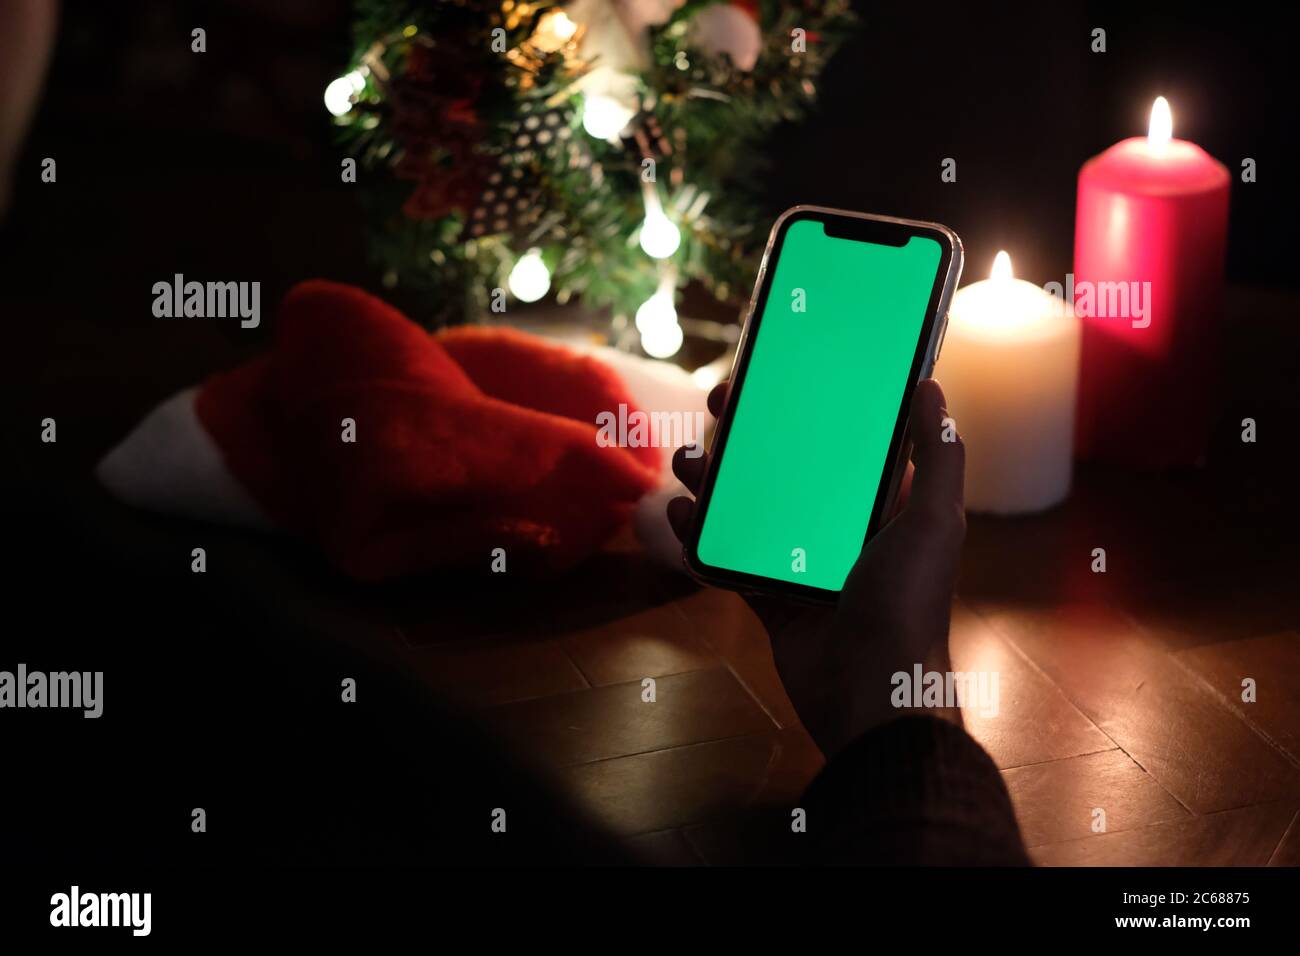 over shoulder of one hand holding green screen smartphone. Blurred christmas tree, hat and candle lights. black background Stock Photo